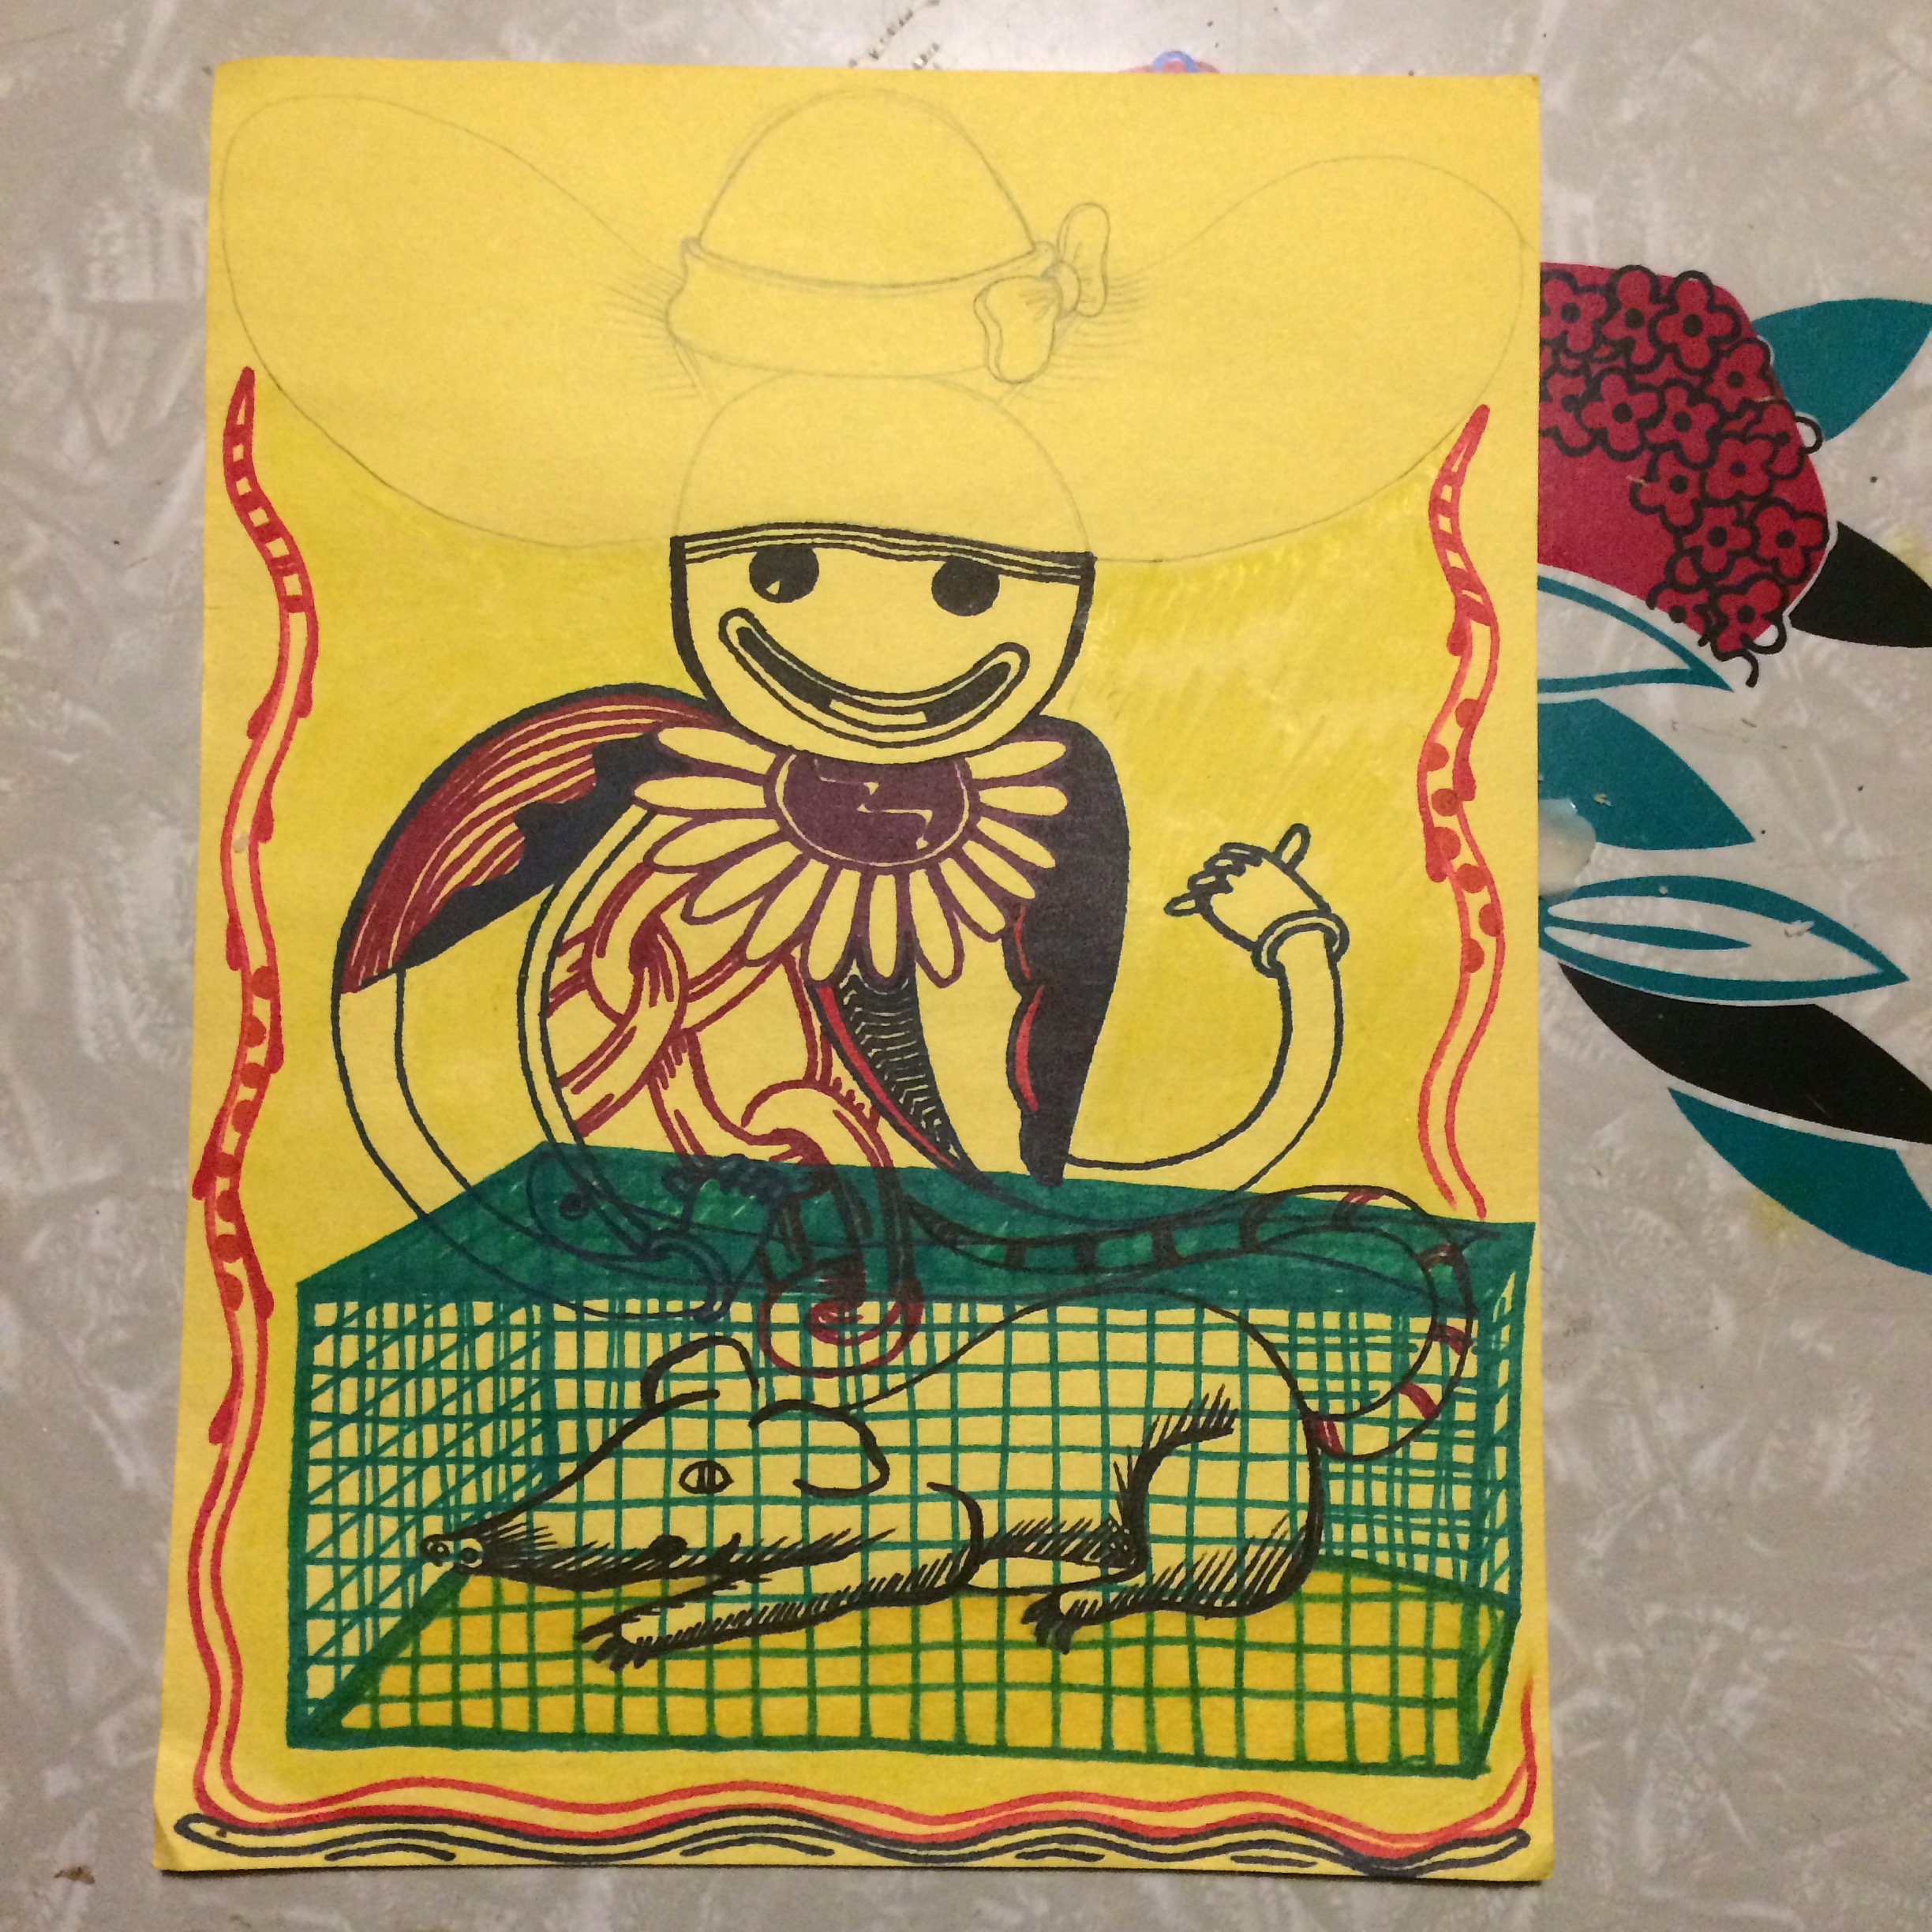 multicolored line drawing of a smiling man with chains and a rat in a cage on yellow paper